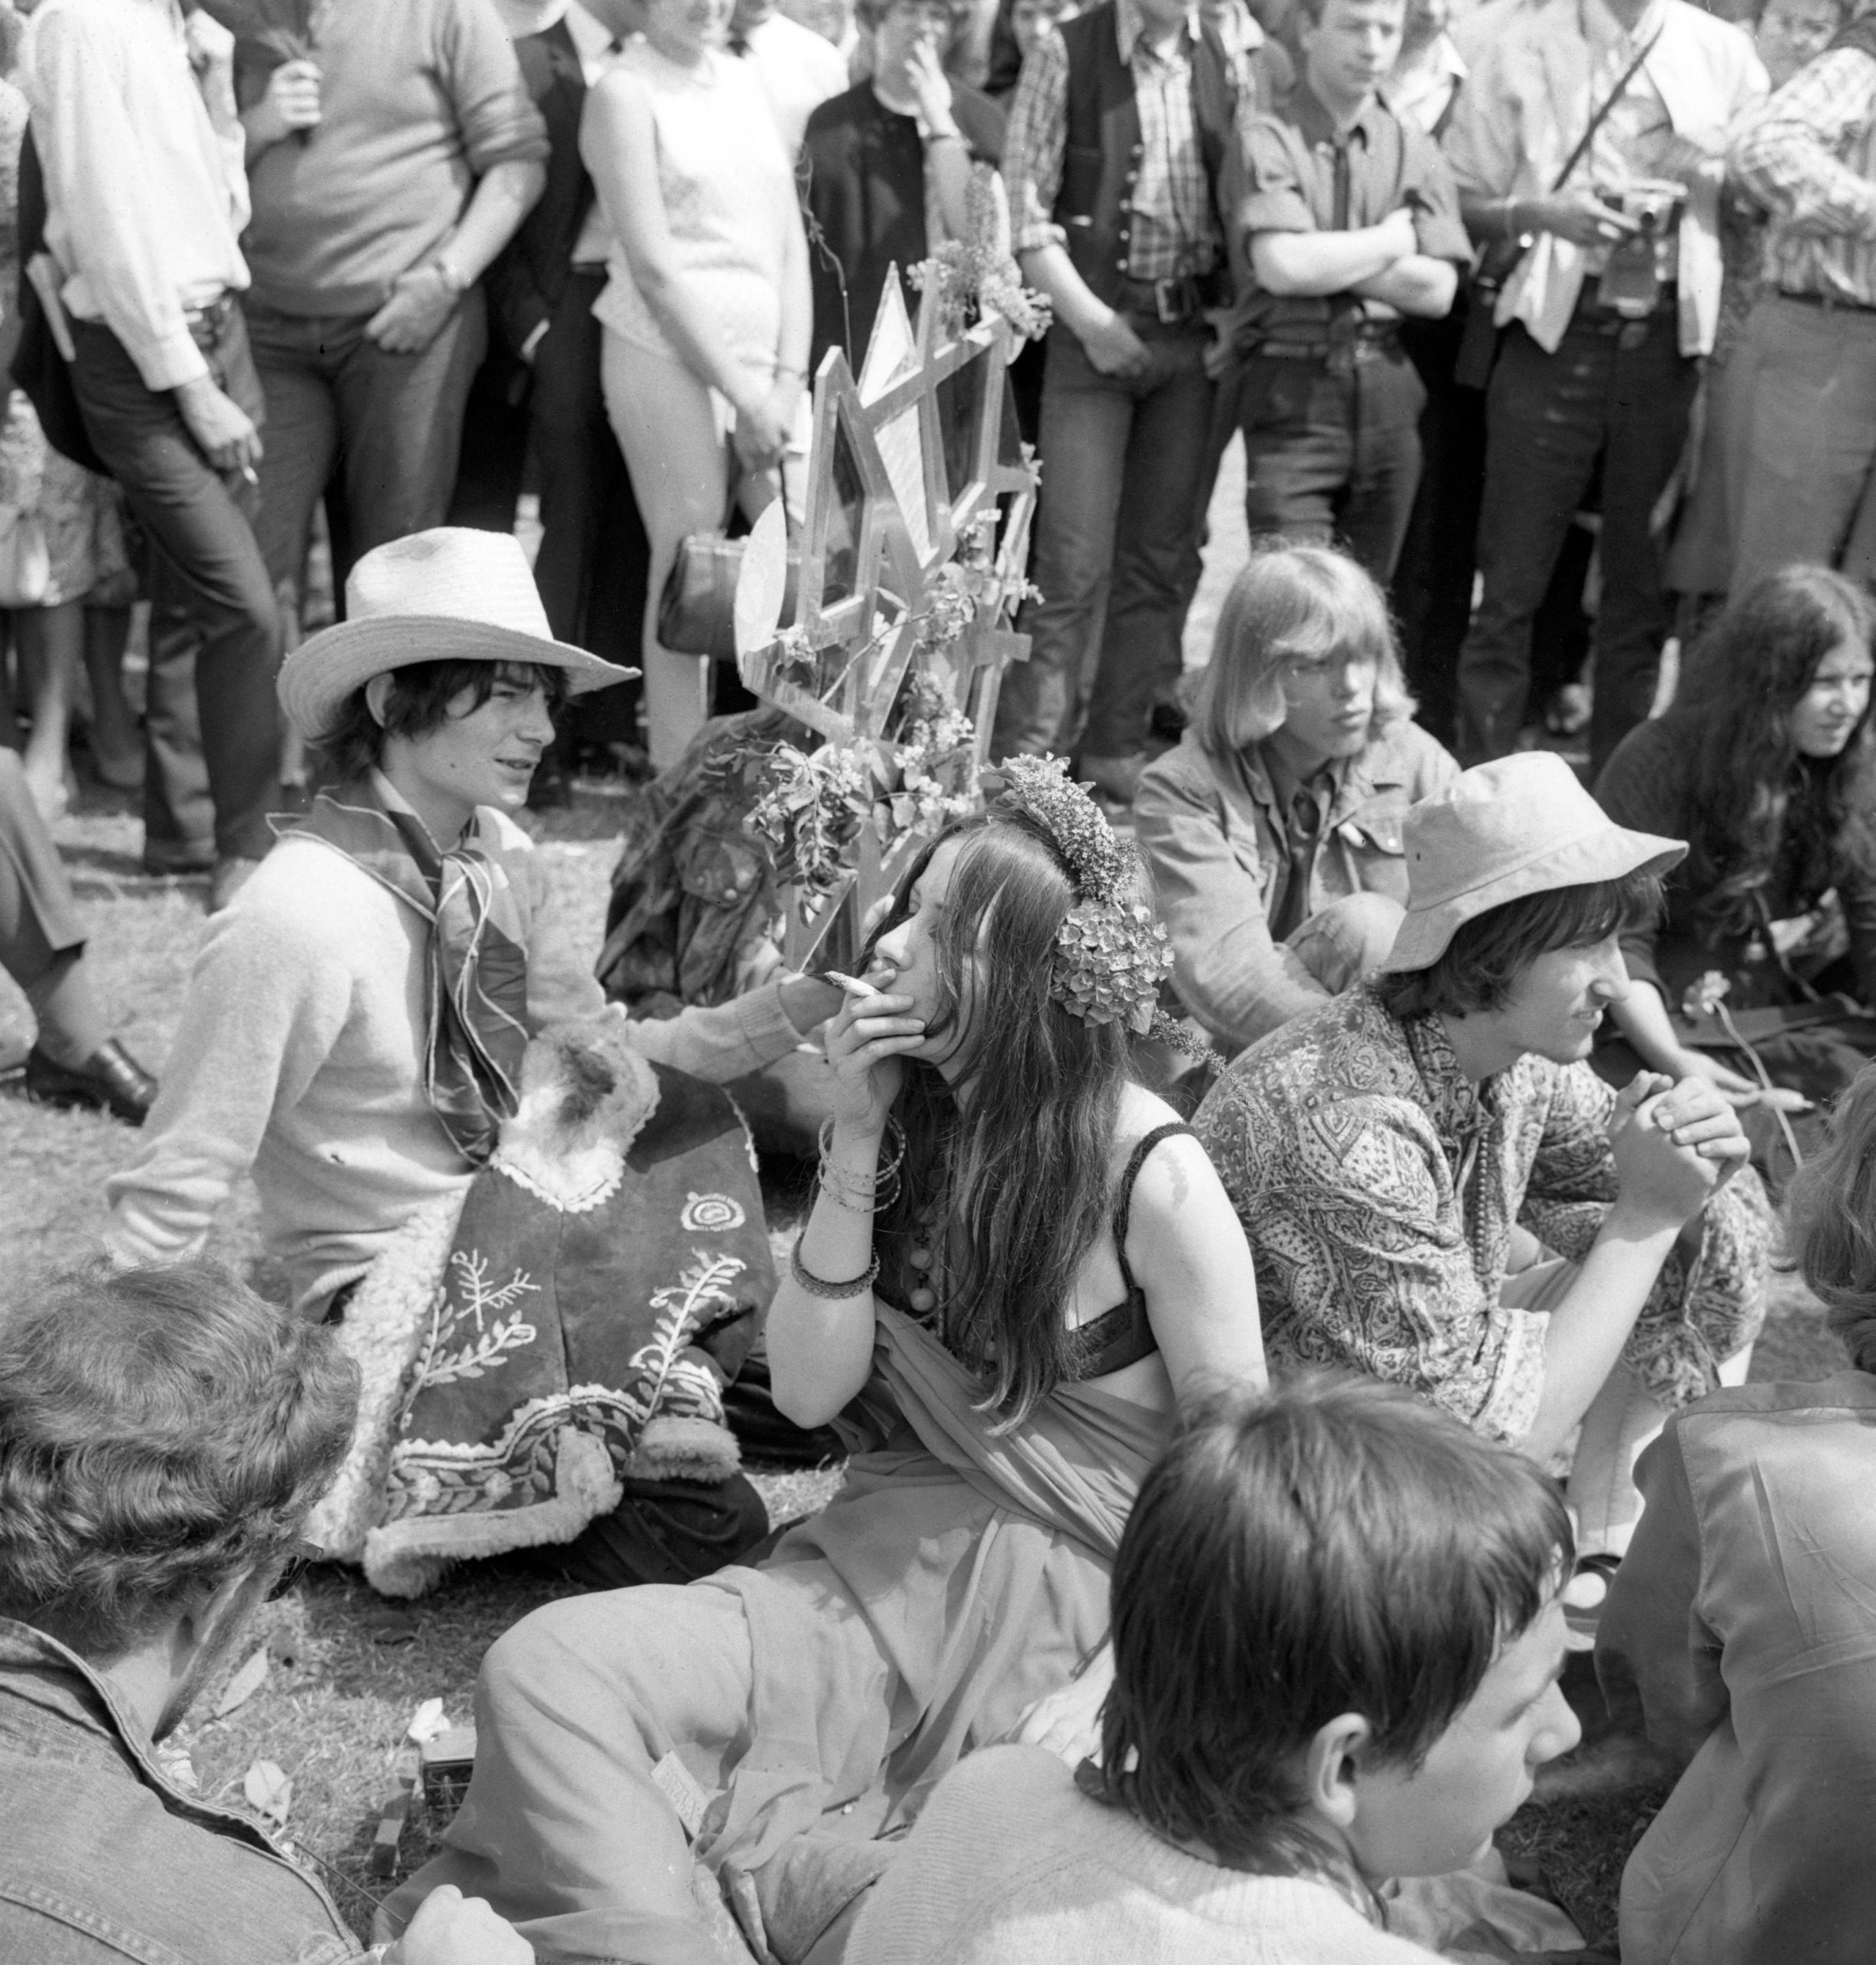 A group of young men and women sit in Hyde Park, London smoking marjuana, 1967